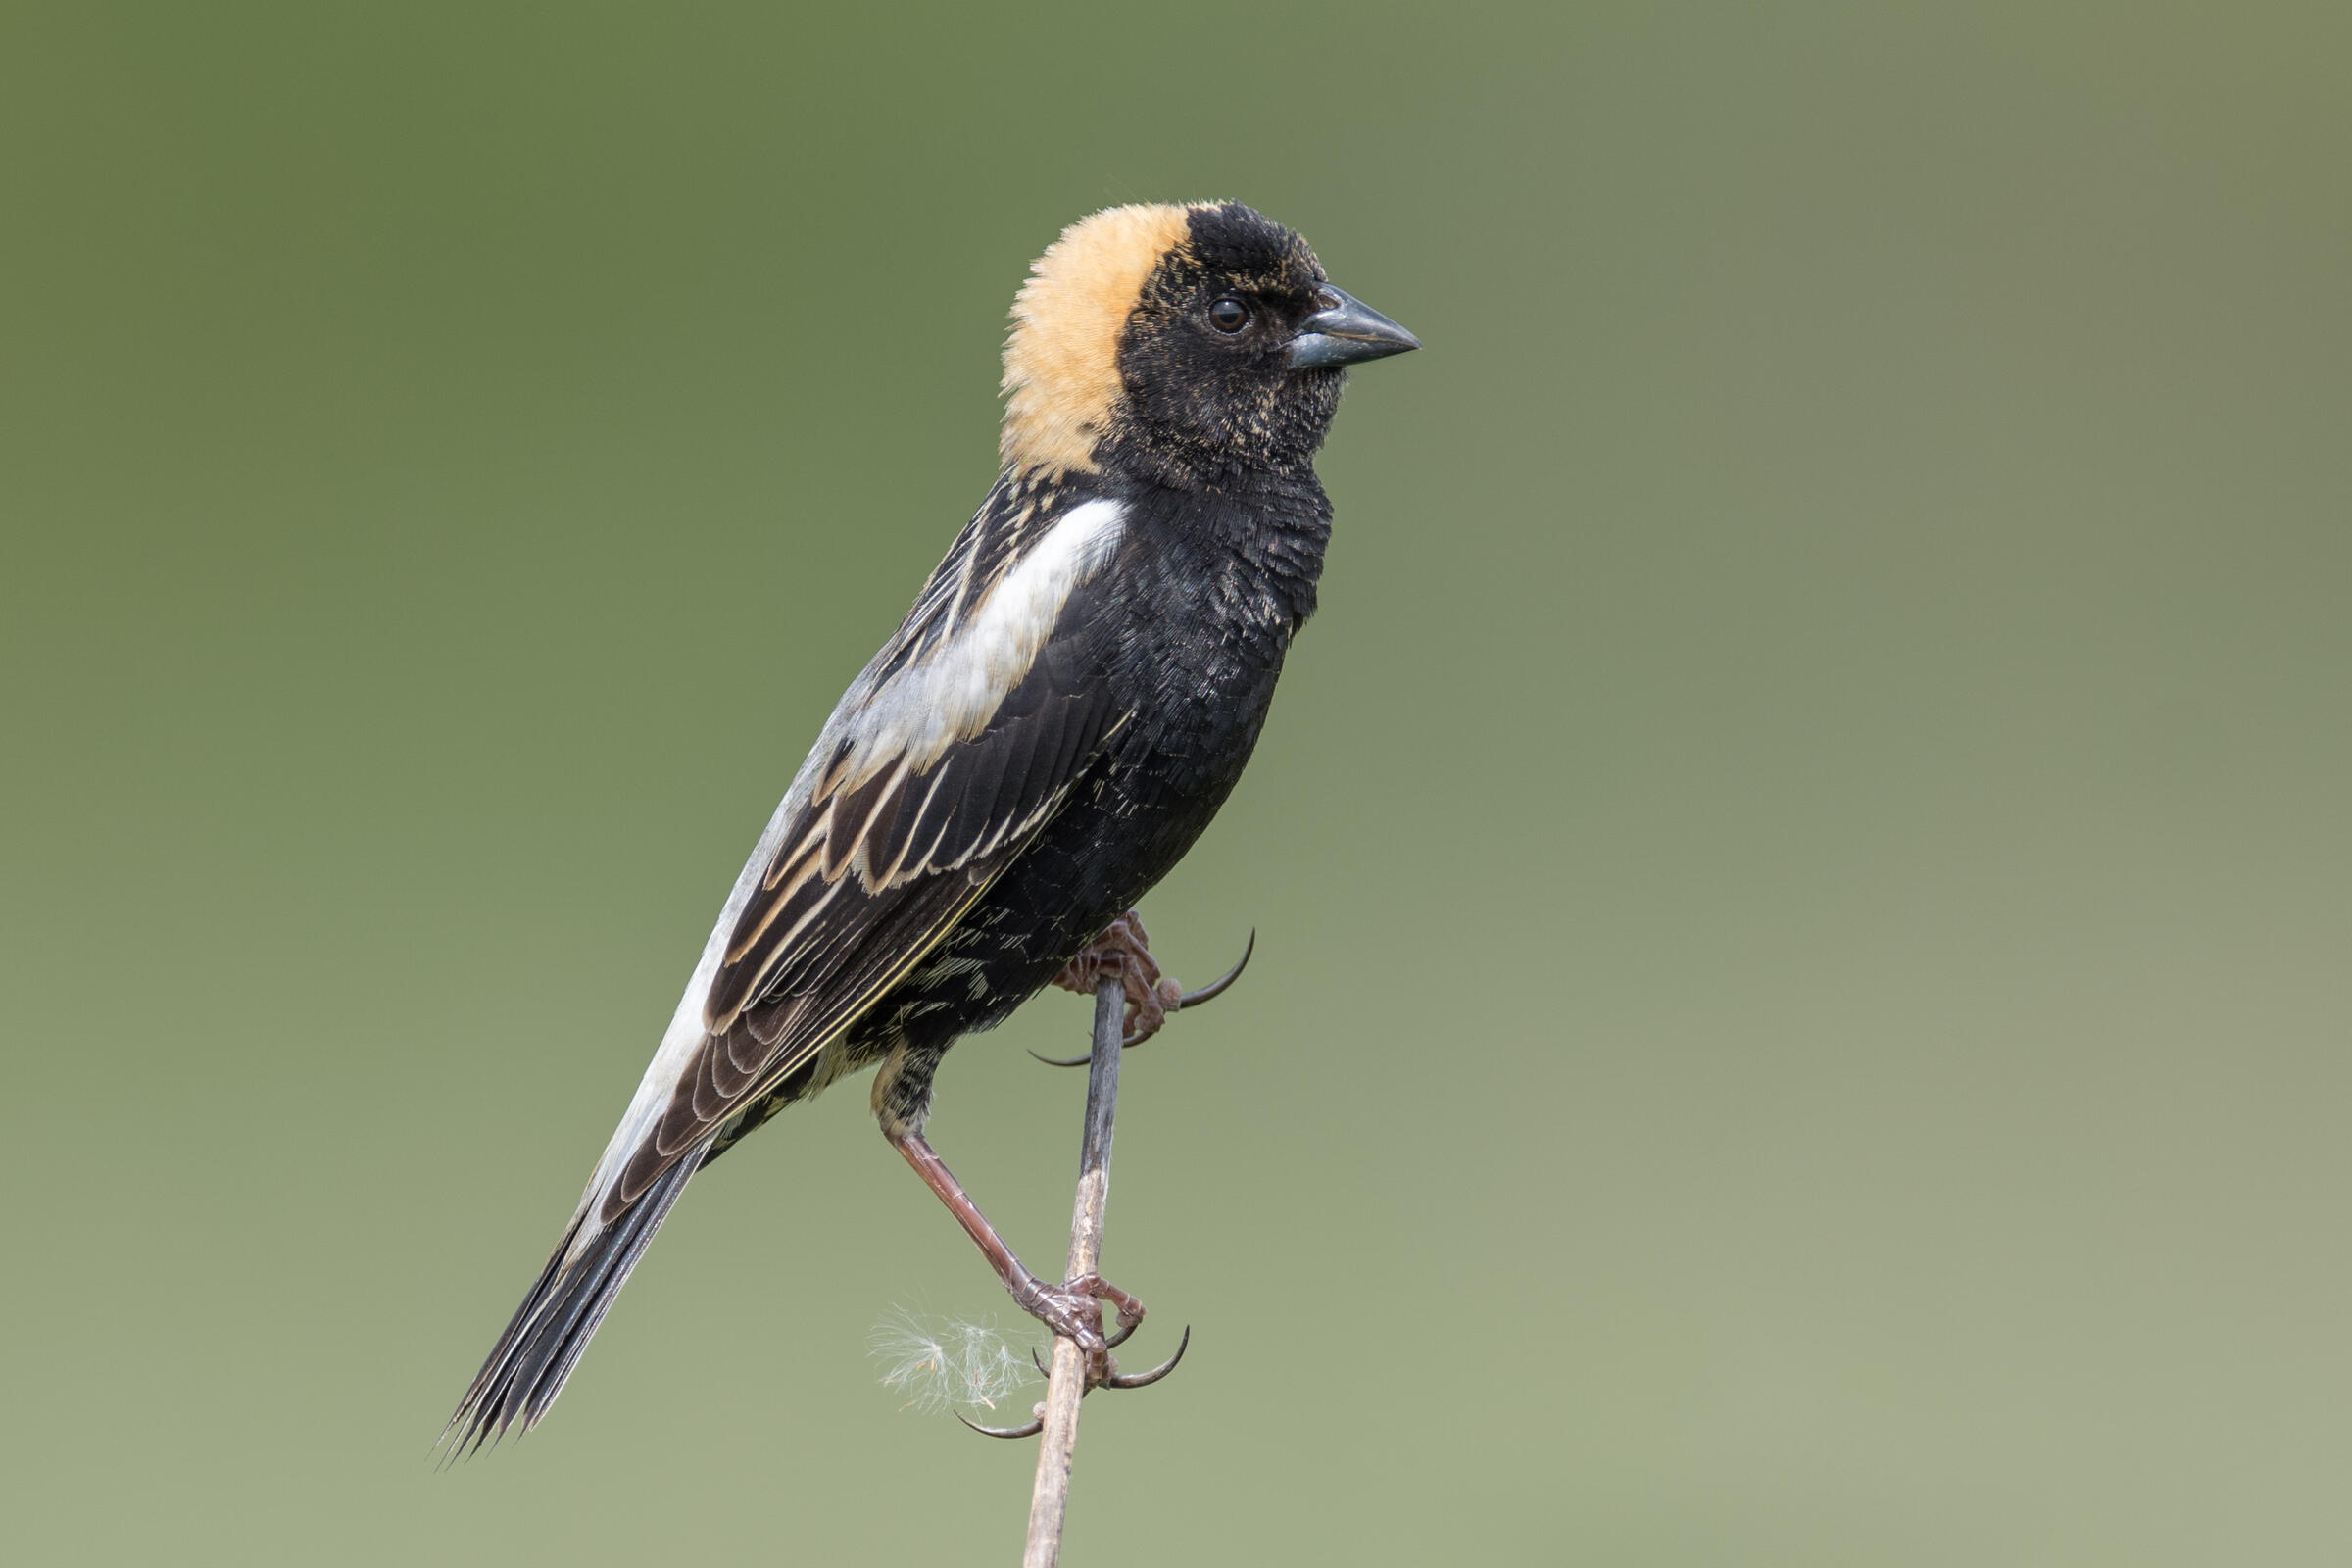 Male Bobolink (black, white and yellow bird) perched on a stem